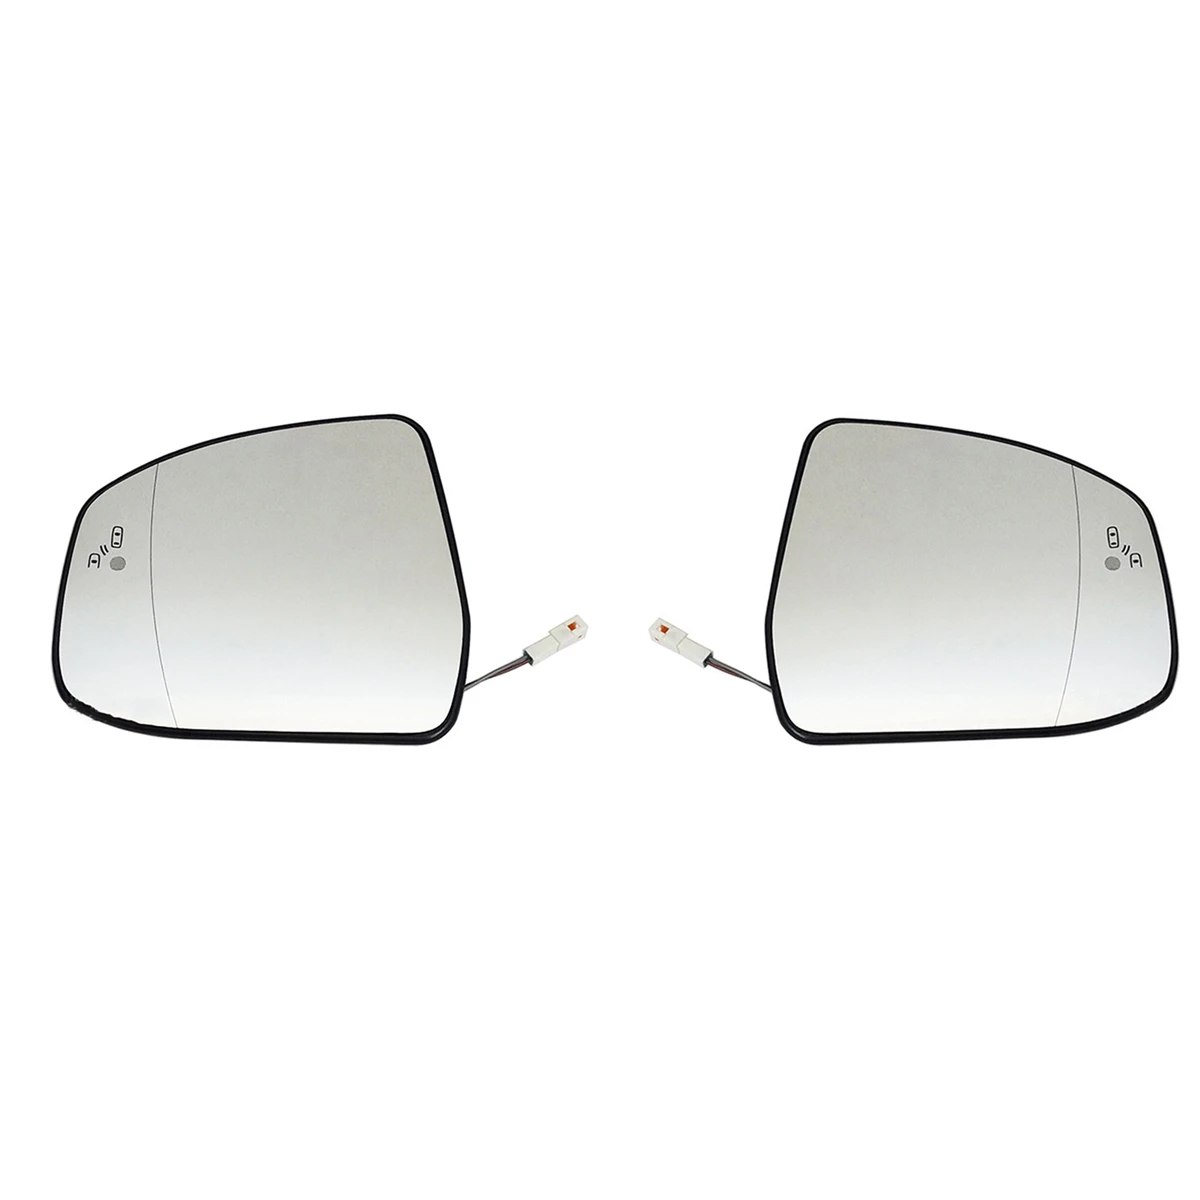 

2Pcs Door Wing Side Mirror Gl Heated Blind Spot Warning with Backing Plate for Ford Focus MK2 MK3 Mondeo MK4 L+R